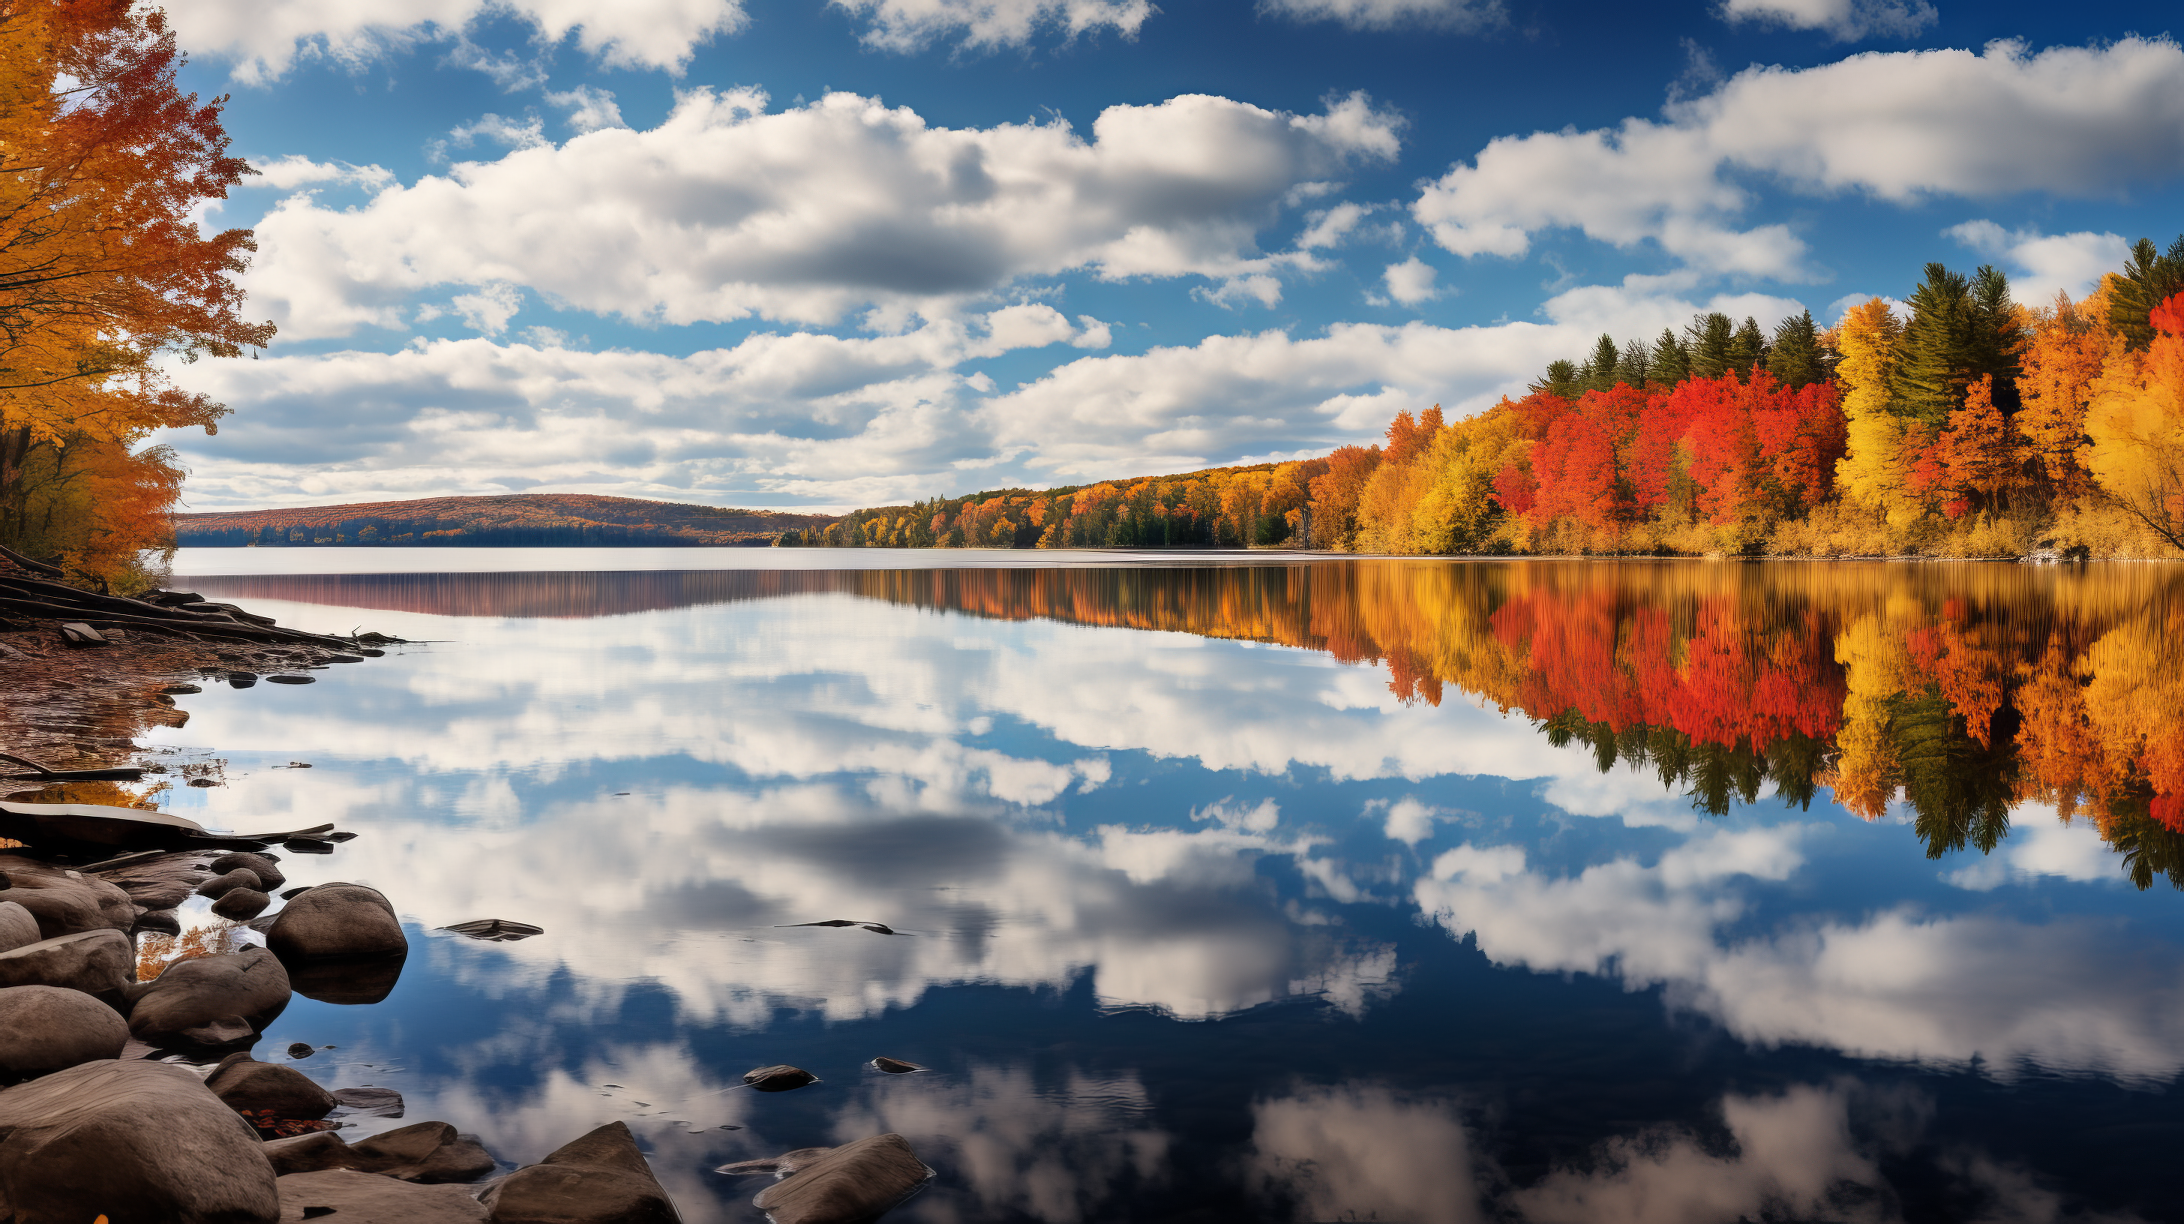 Serene Autumn Landscape with a Reflective Lake Wallpaper by patrika